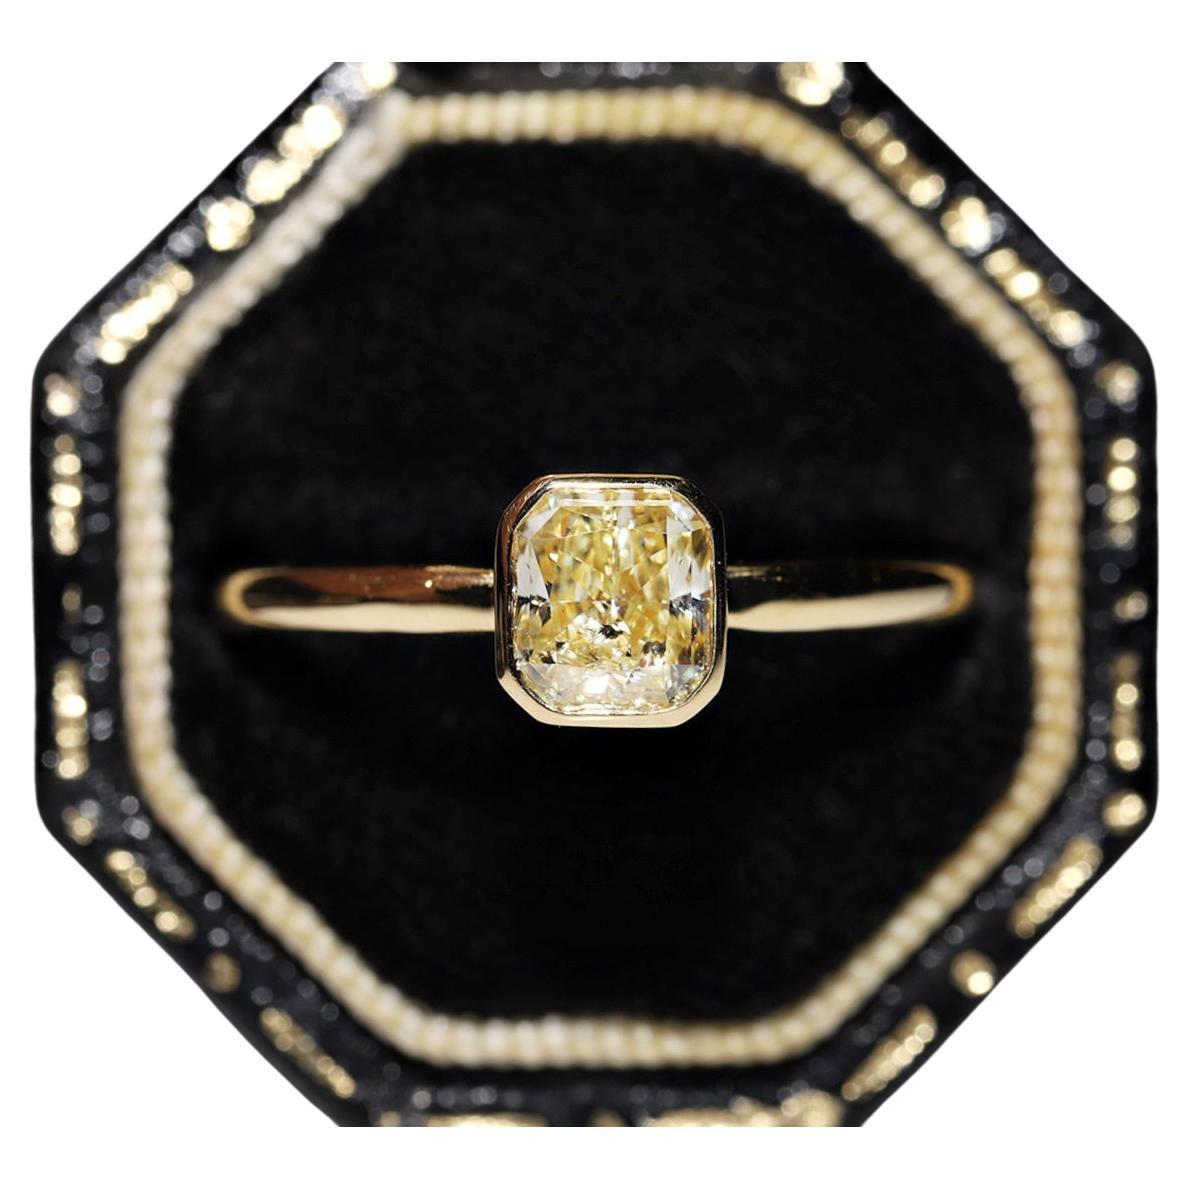  18k Gold Natural Radiant Cut Diamond Decorated Solitaire Ring